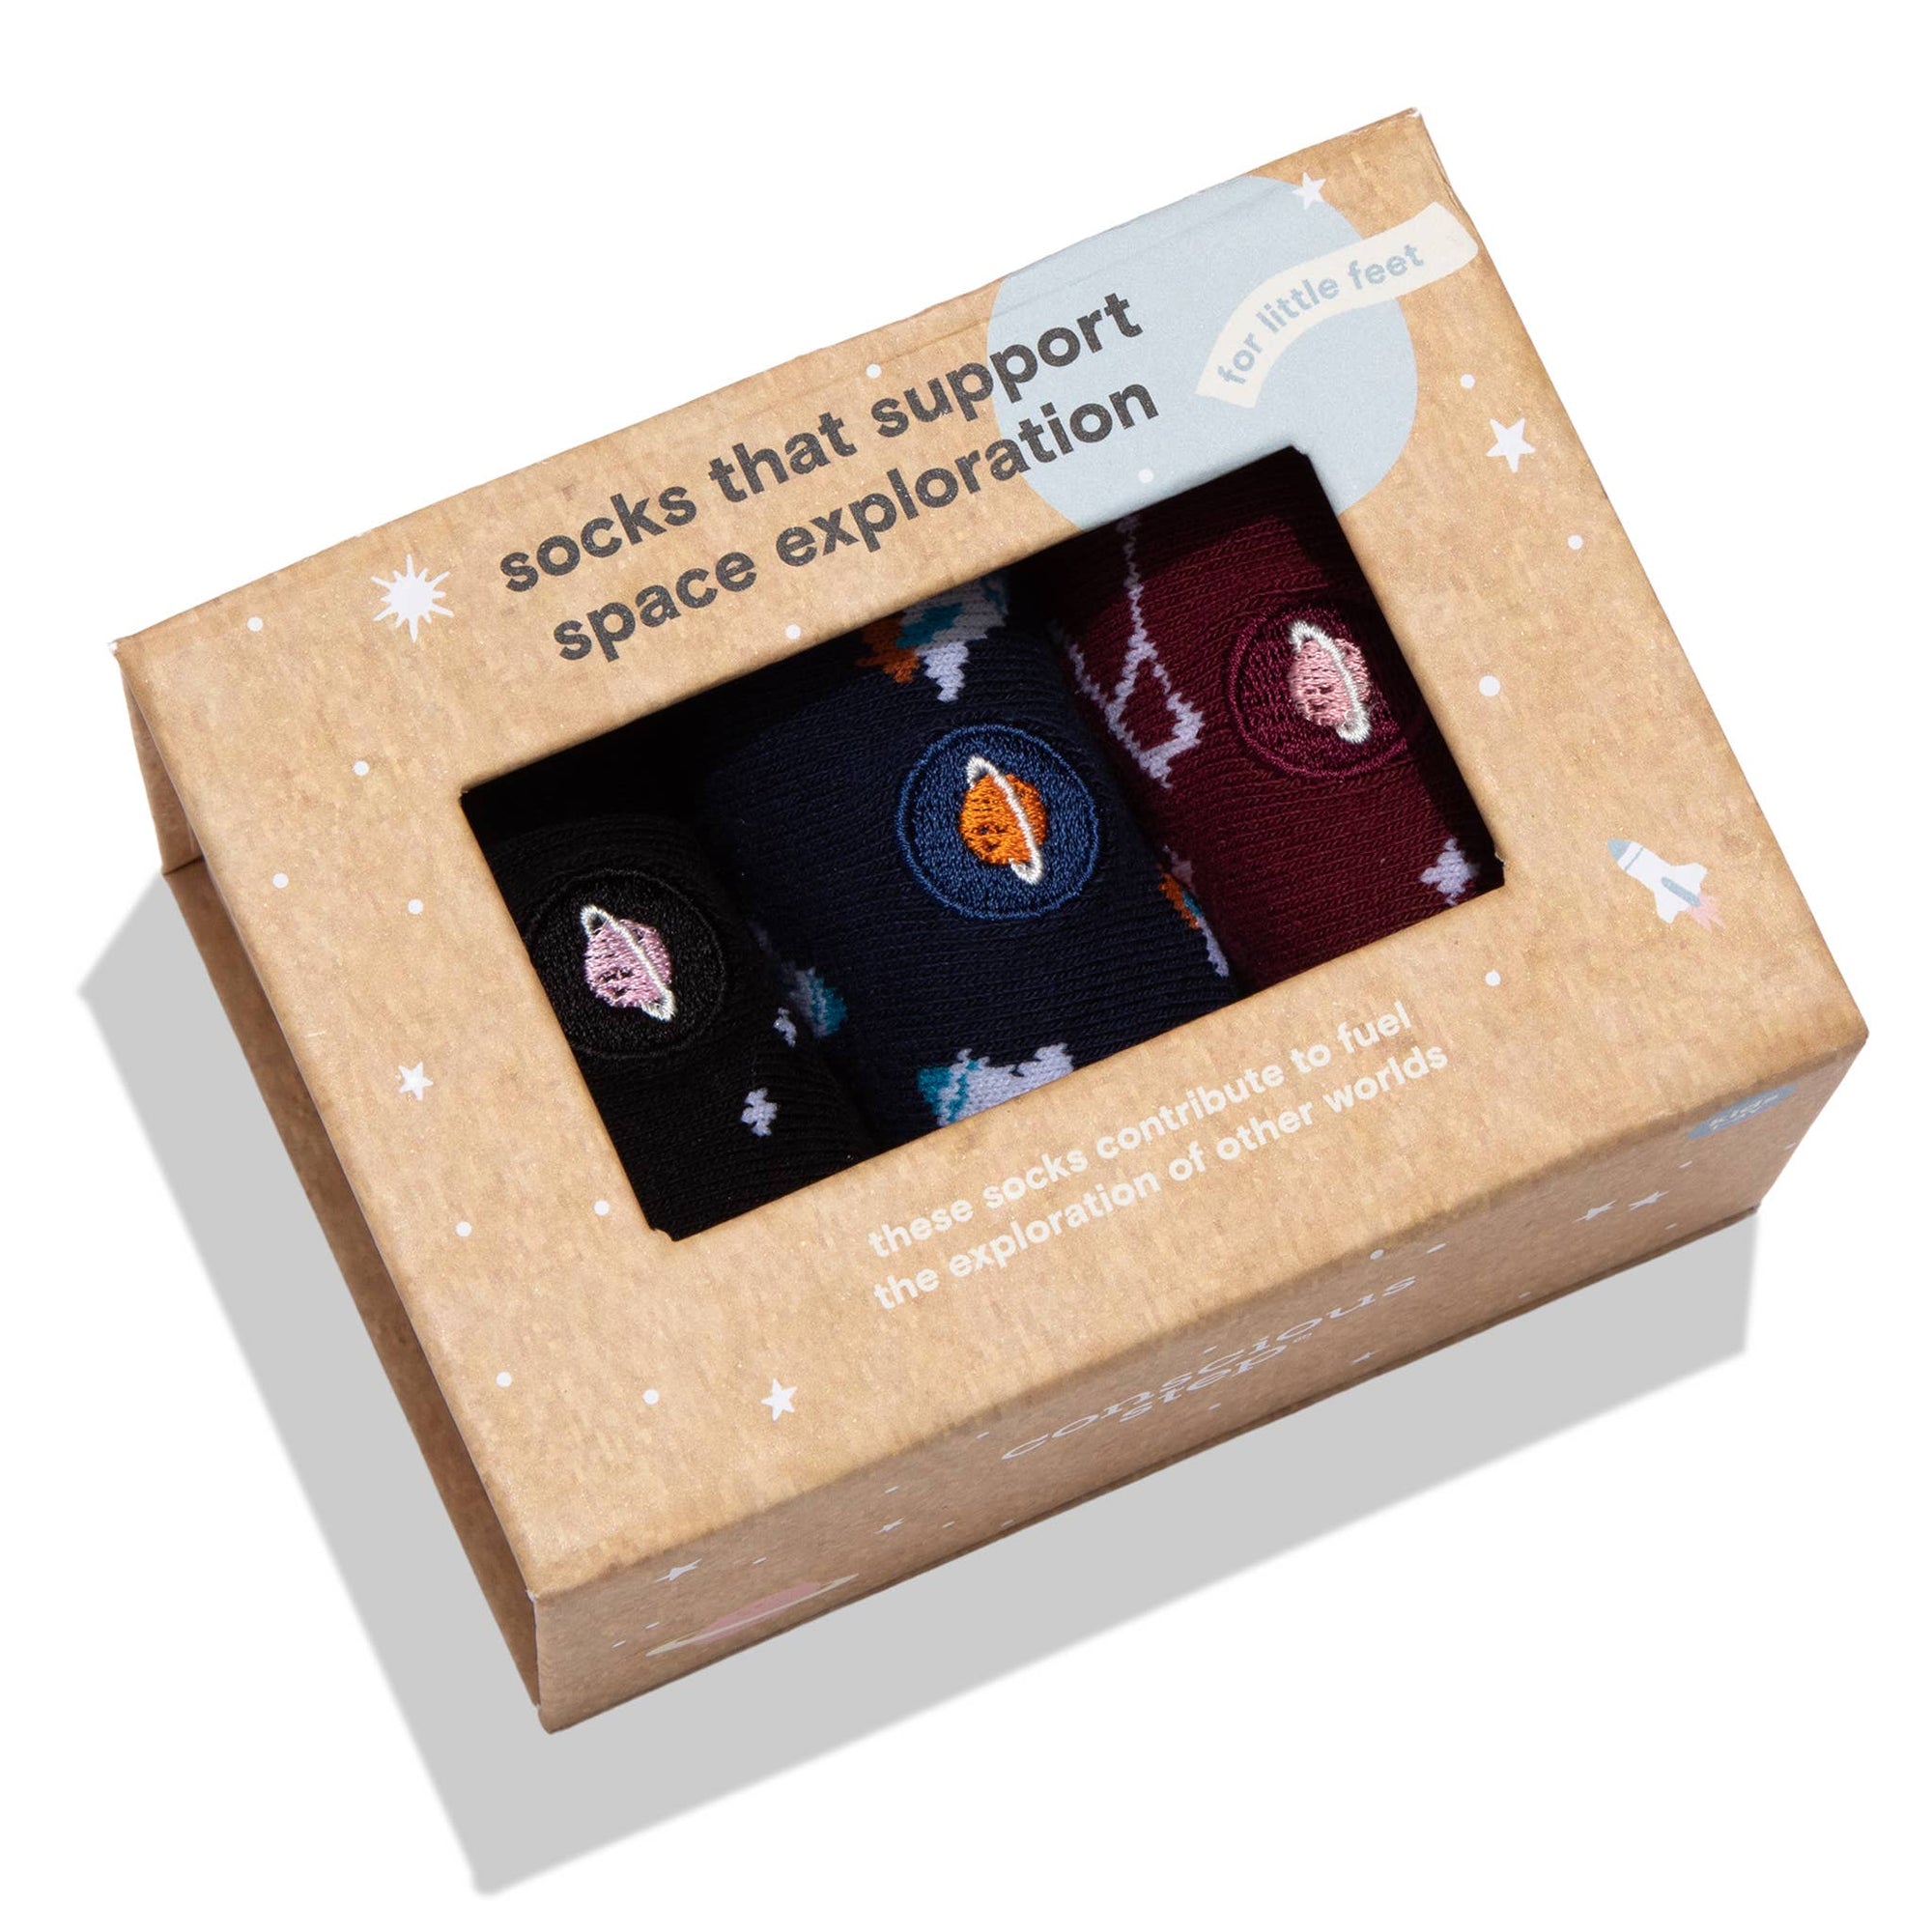 Kids Socks that Support Space Exploration - Boxed Set